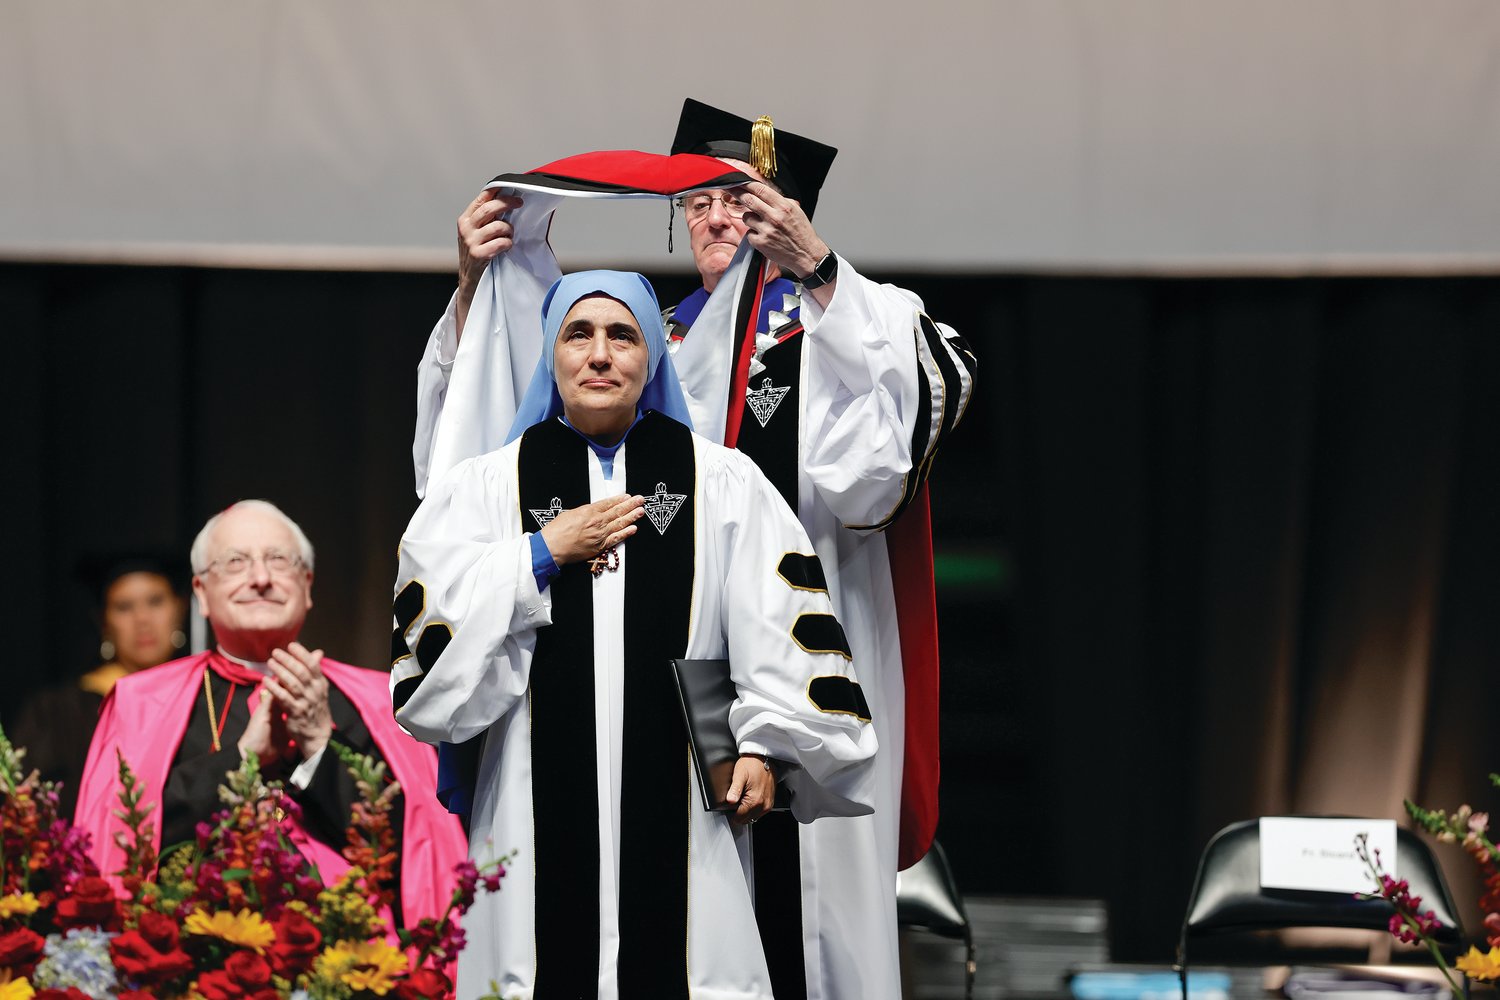 Mother Olga receives her honorary doctorate at PC’s recent commencement.